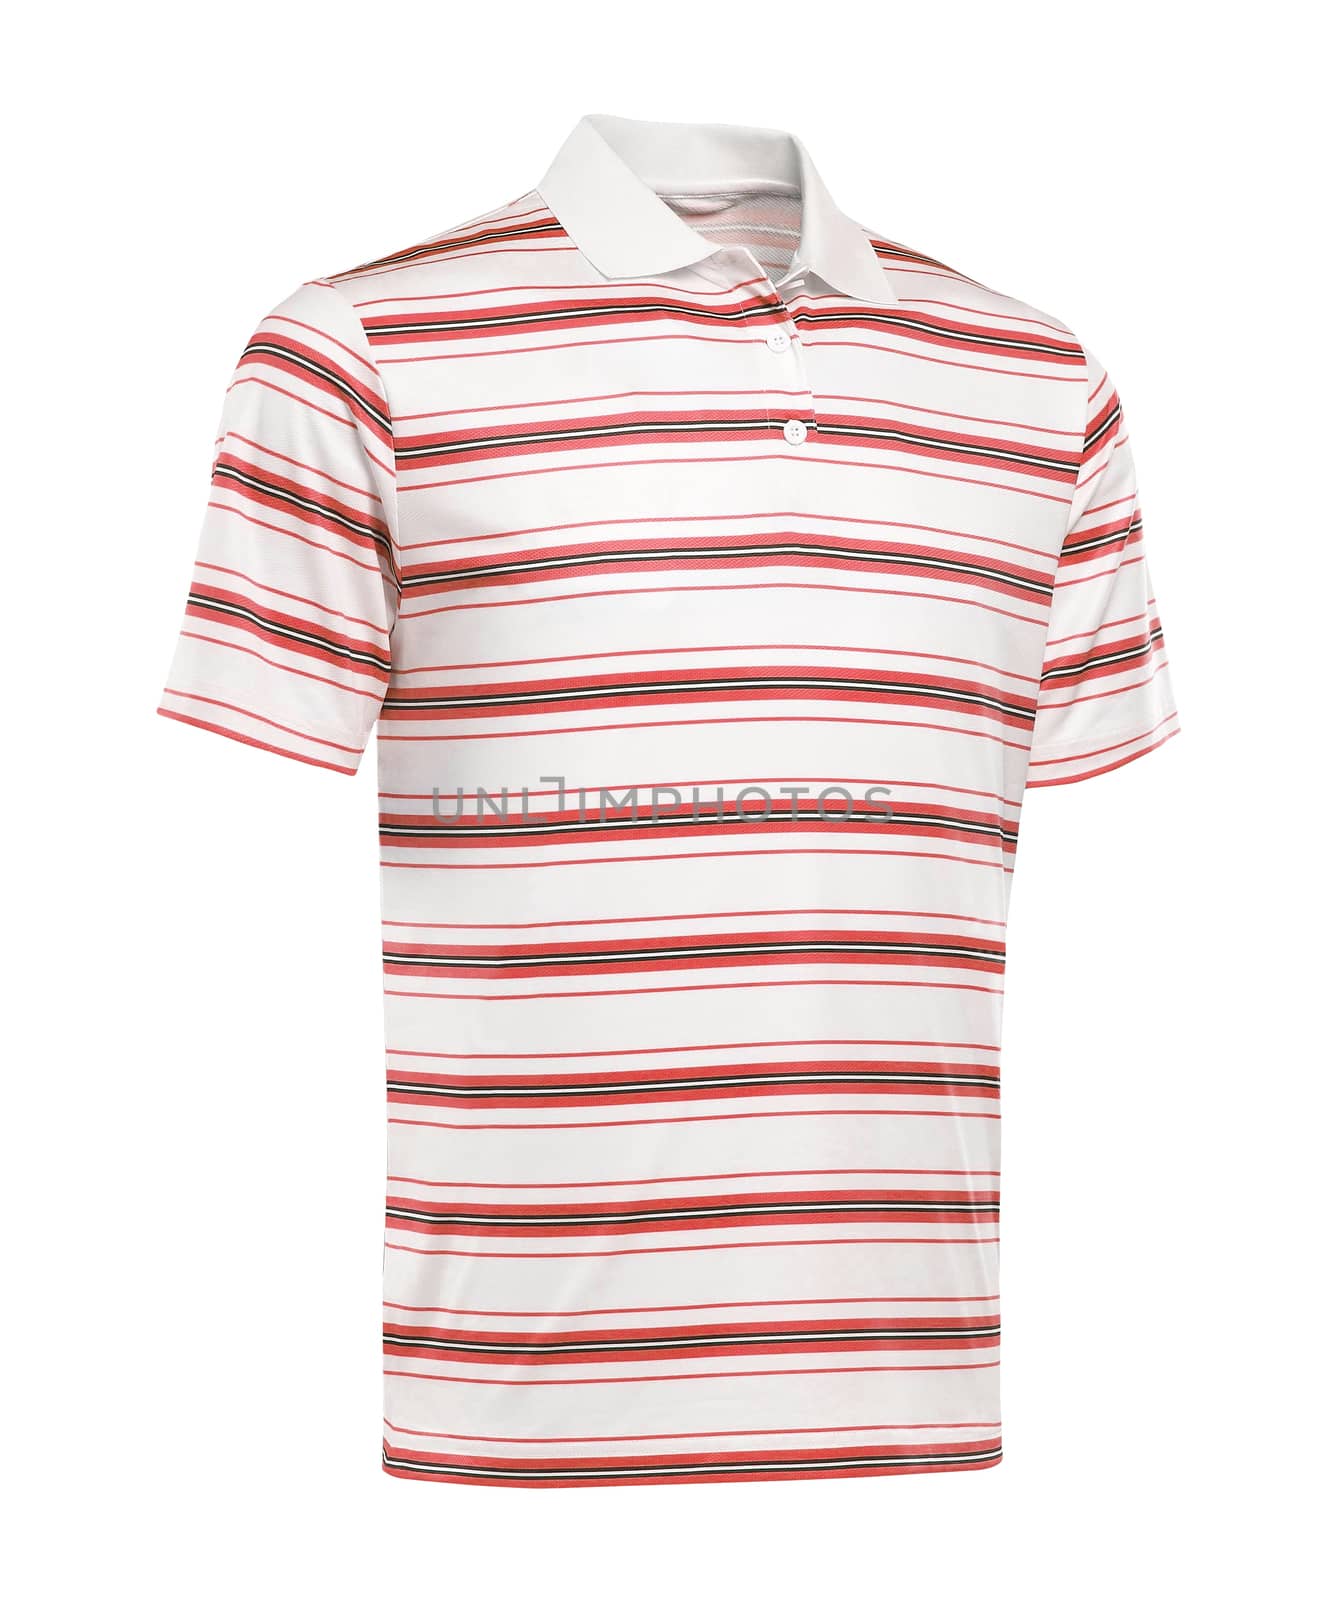 red and white striped t-shirt